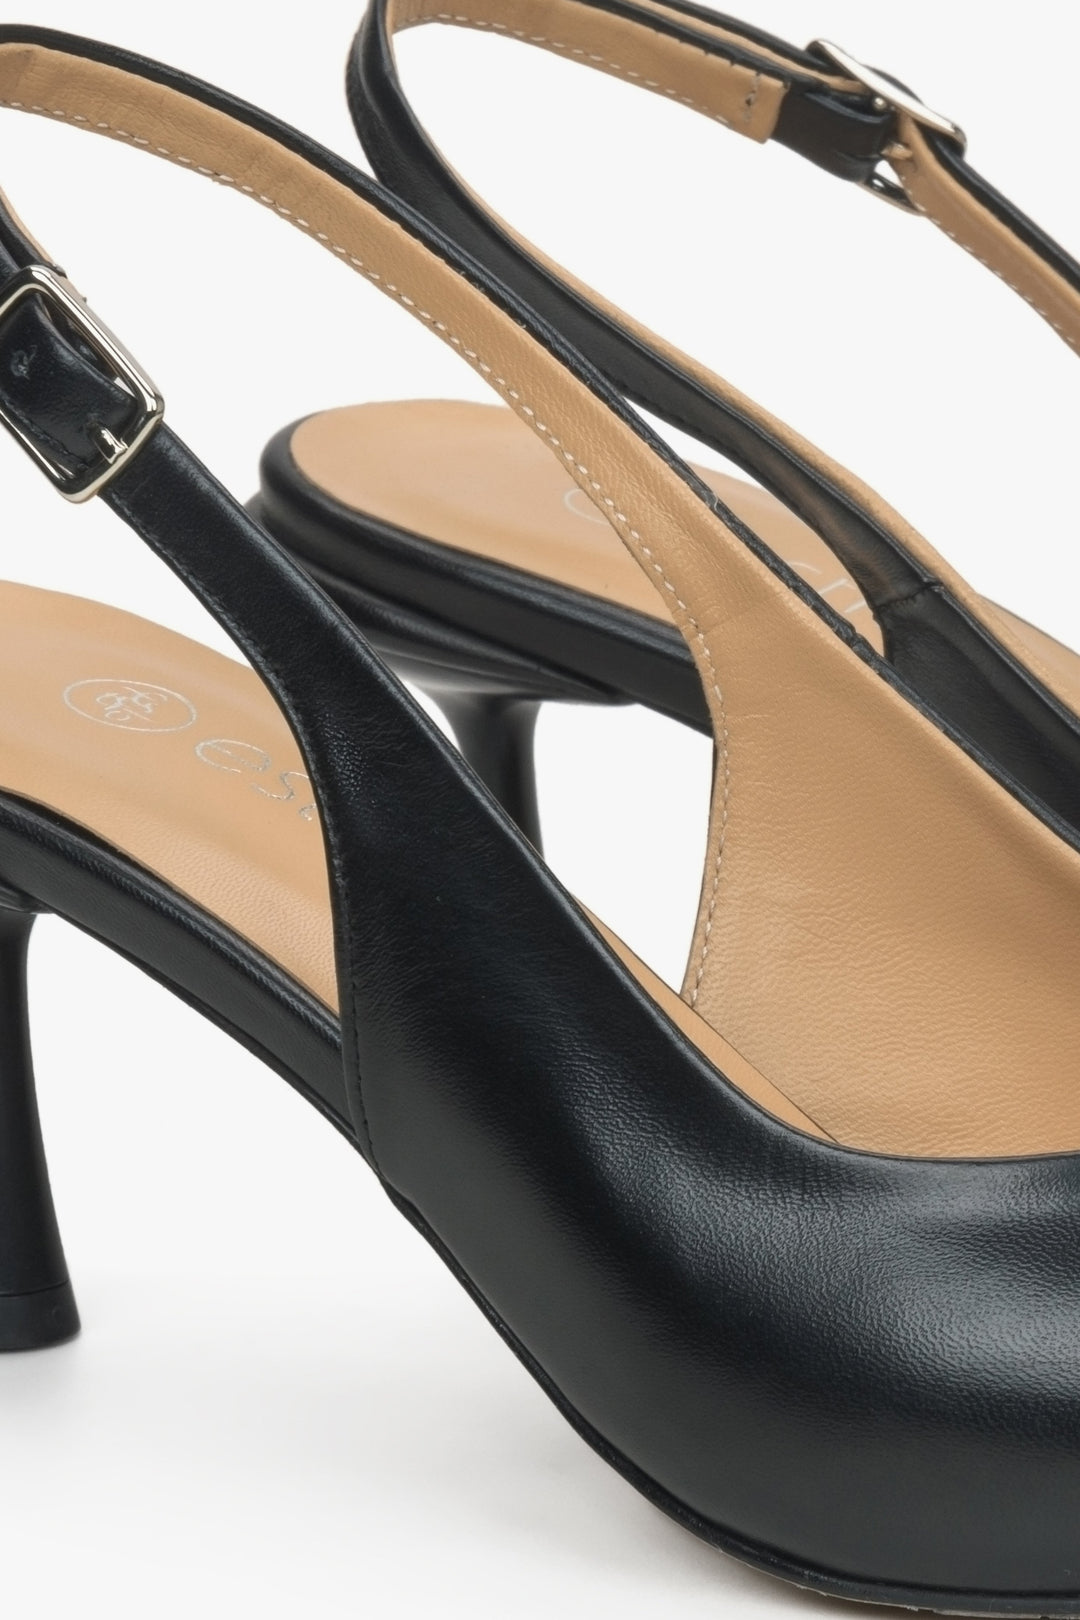 Women's black leather slingback shoes by Estro - close-up on the detail.